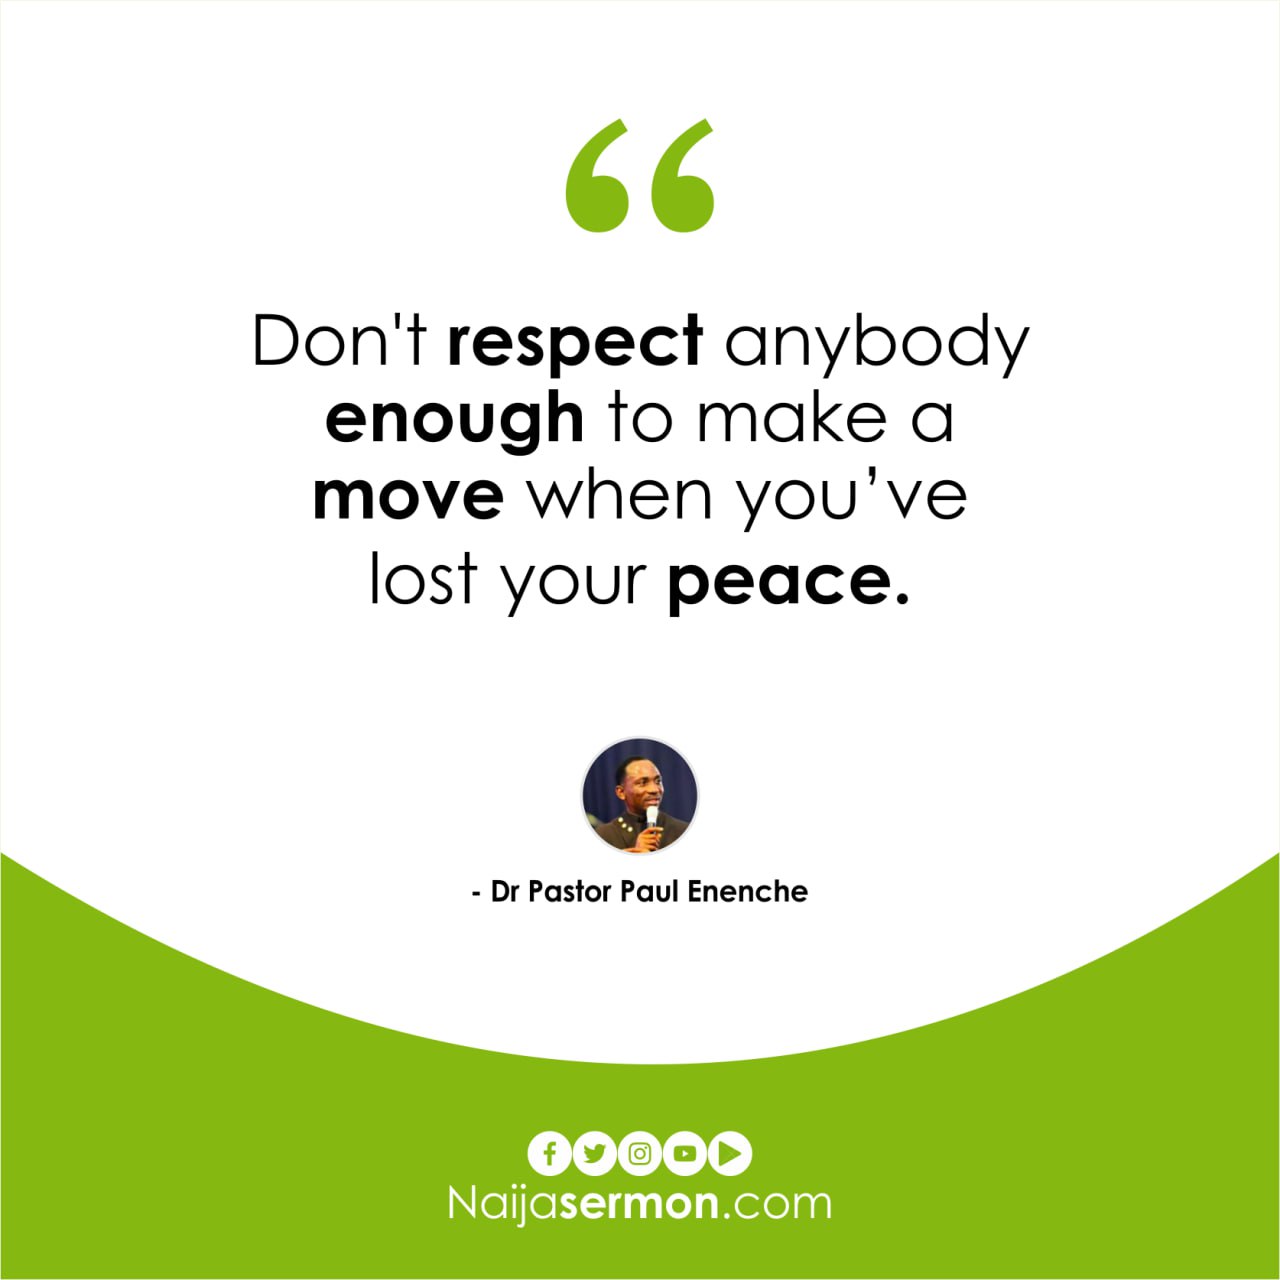 QUOTE OF THE DAY BY DR PASTOR PAUL ENENCHE 4